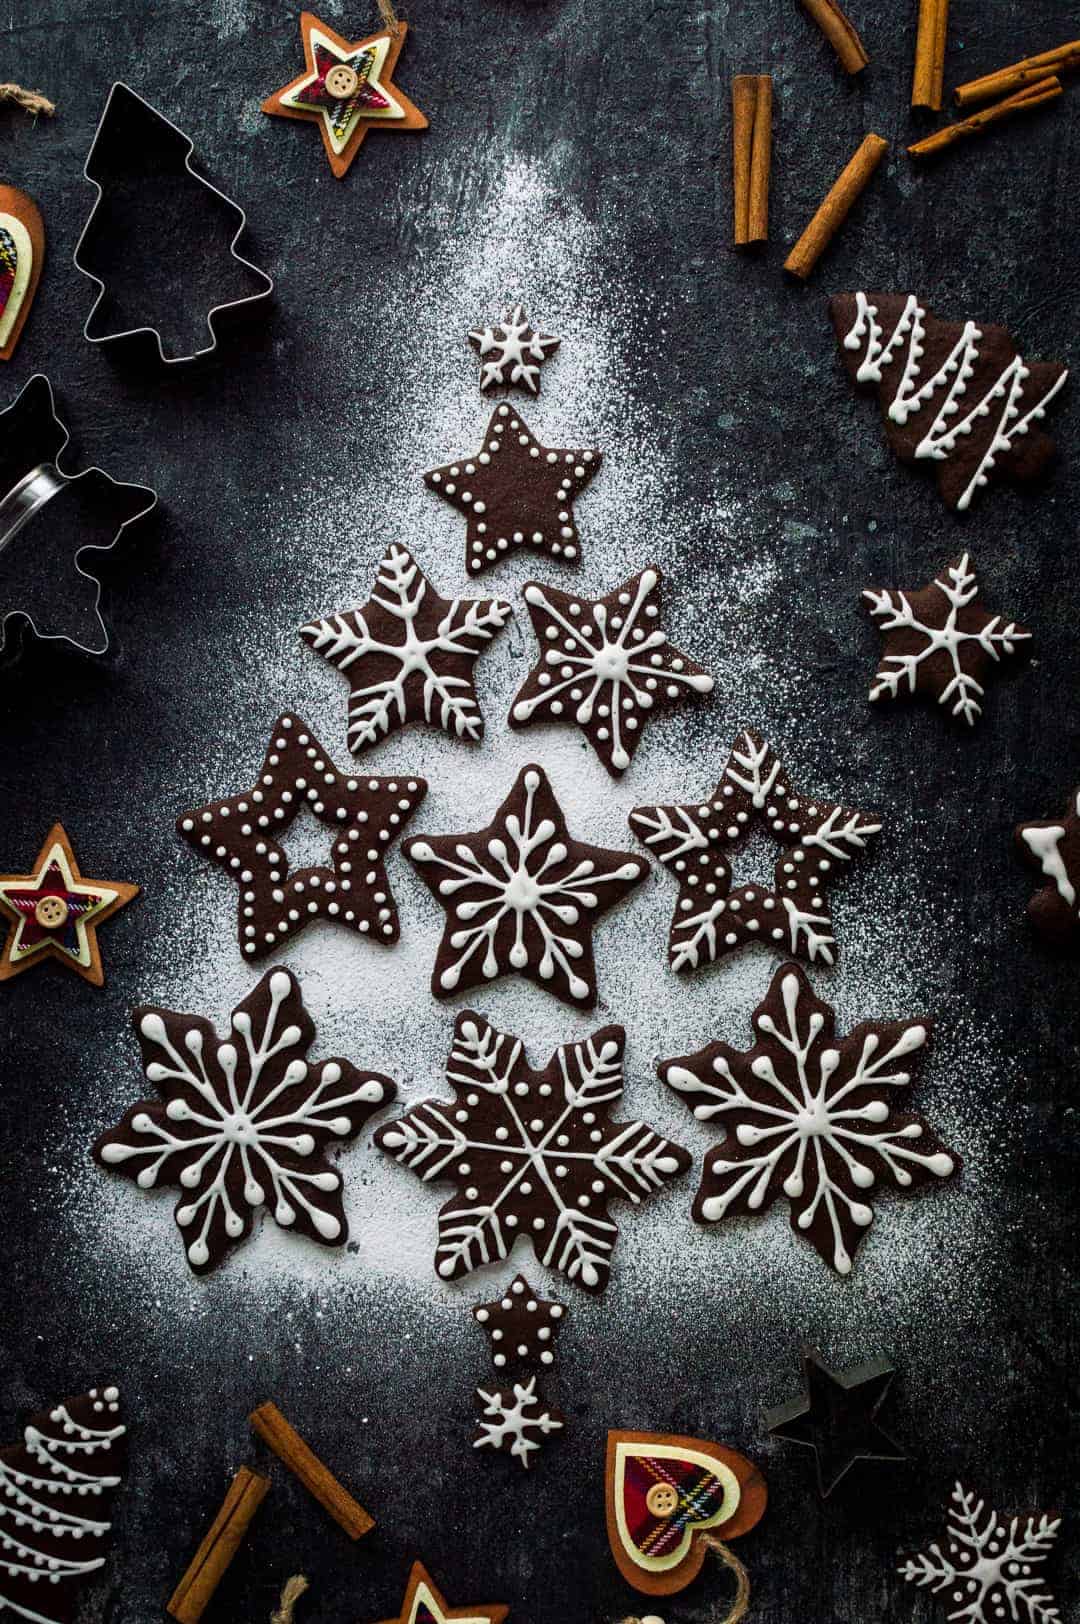 Chocolate gingerbread biscuits - a chocolatey twist on classic gingerbread biscuits; they make great cut-outs for Christmas!